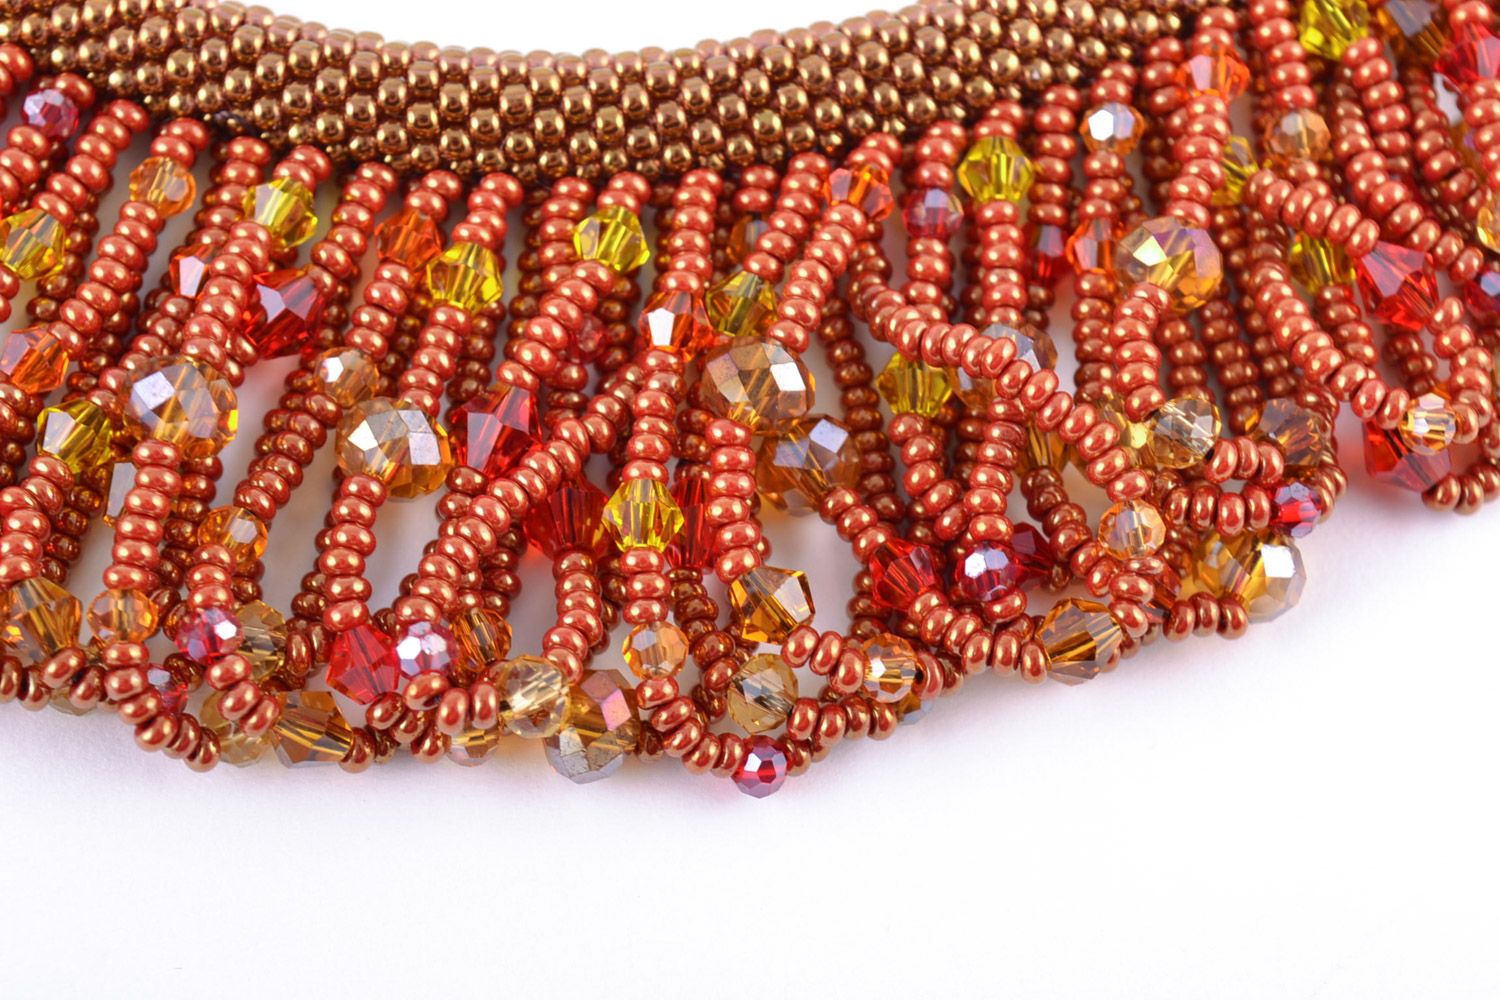 Massive handmade necklace woven of beads with fringe in warm color palette photo 3